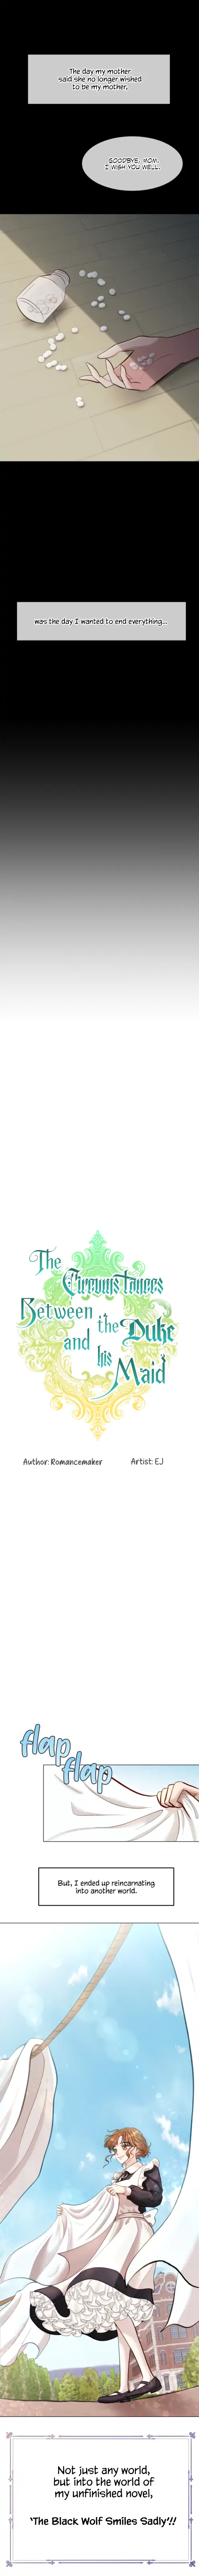 The Circumstances Between the Duke and His Maid chapter 0